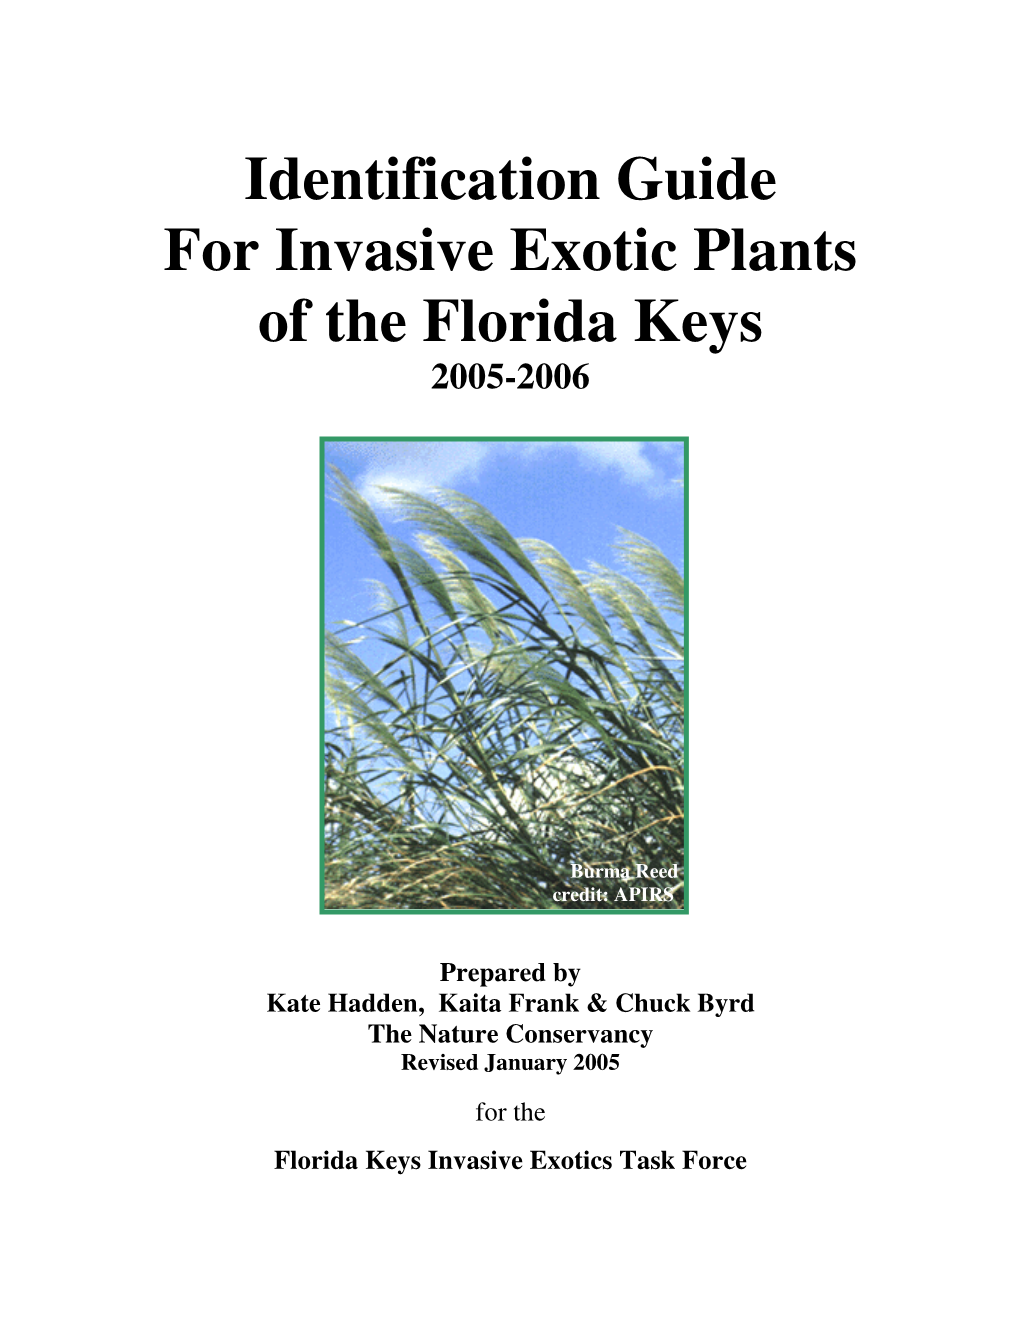 Identification Guide for Invasive Exotic Plants of the Florida Keys 2005-2006